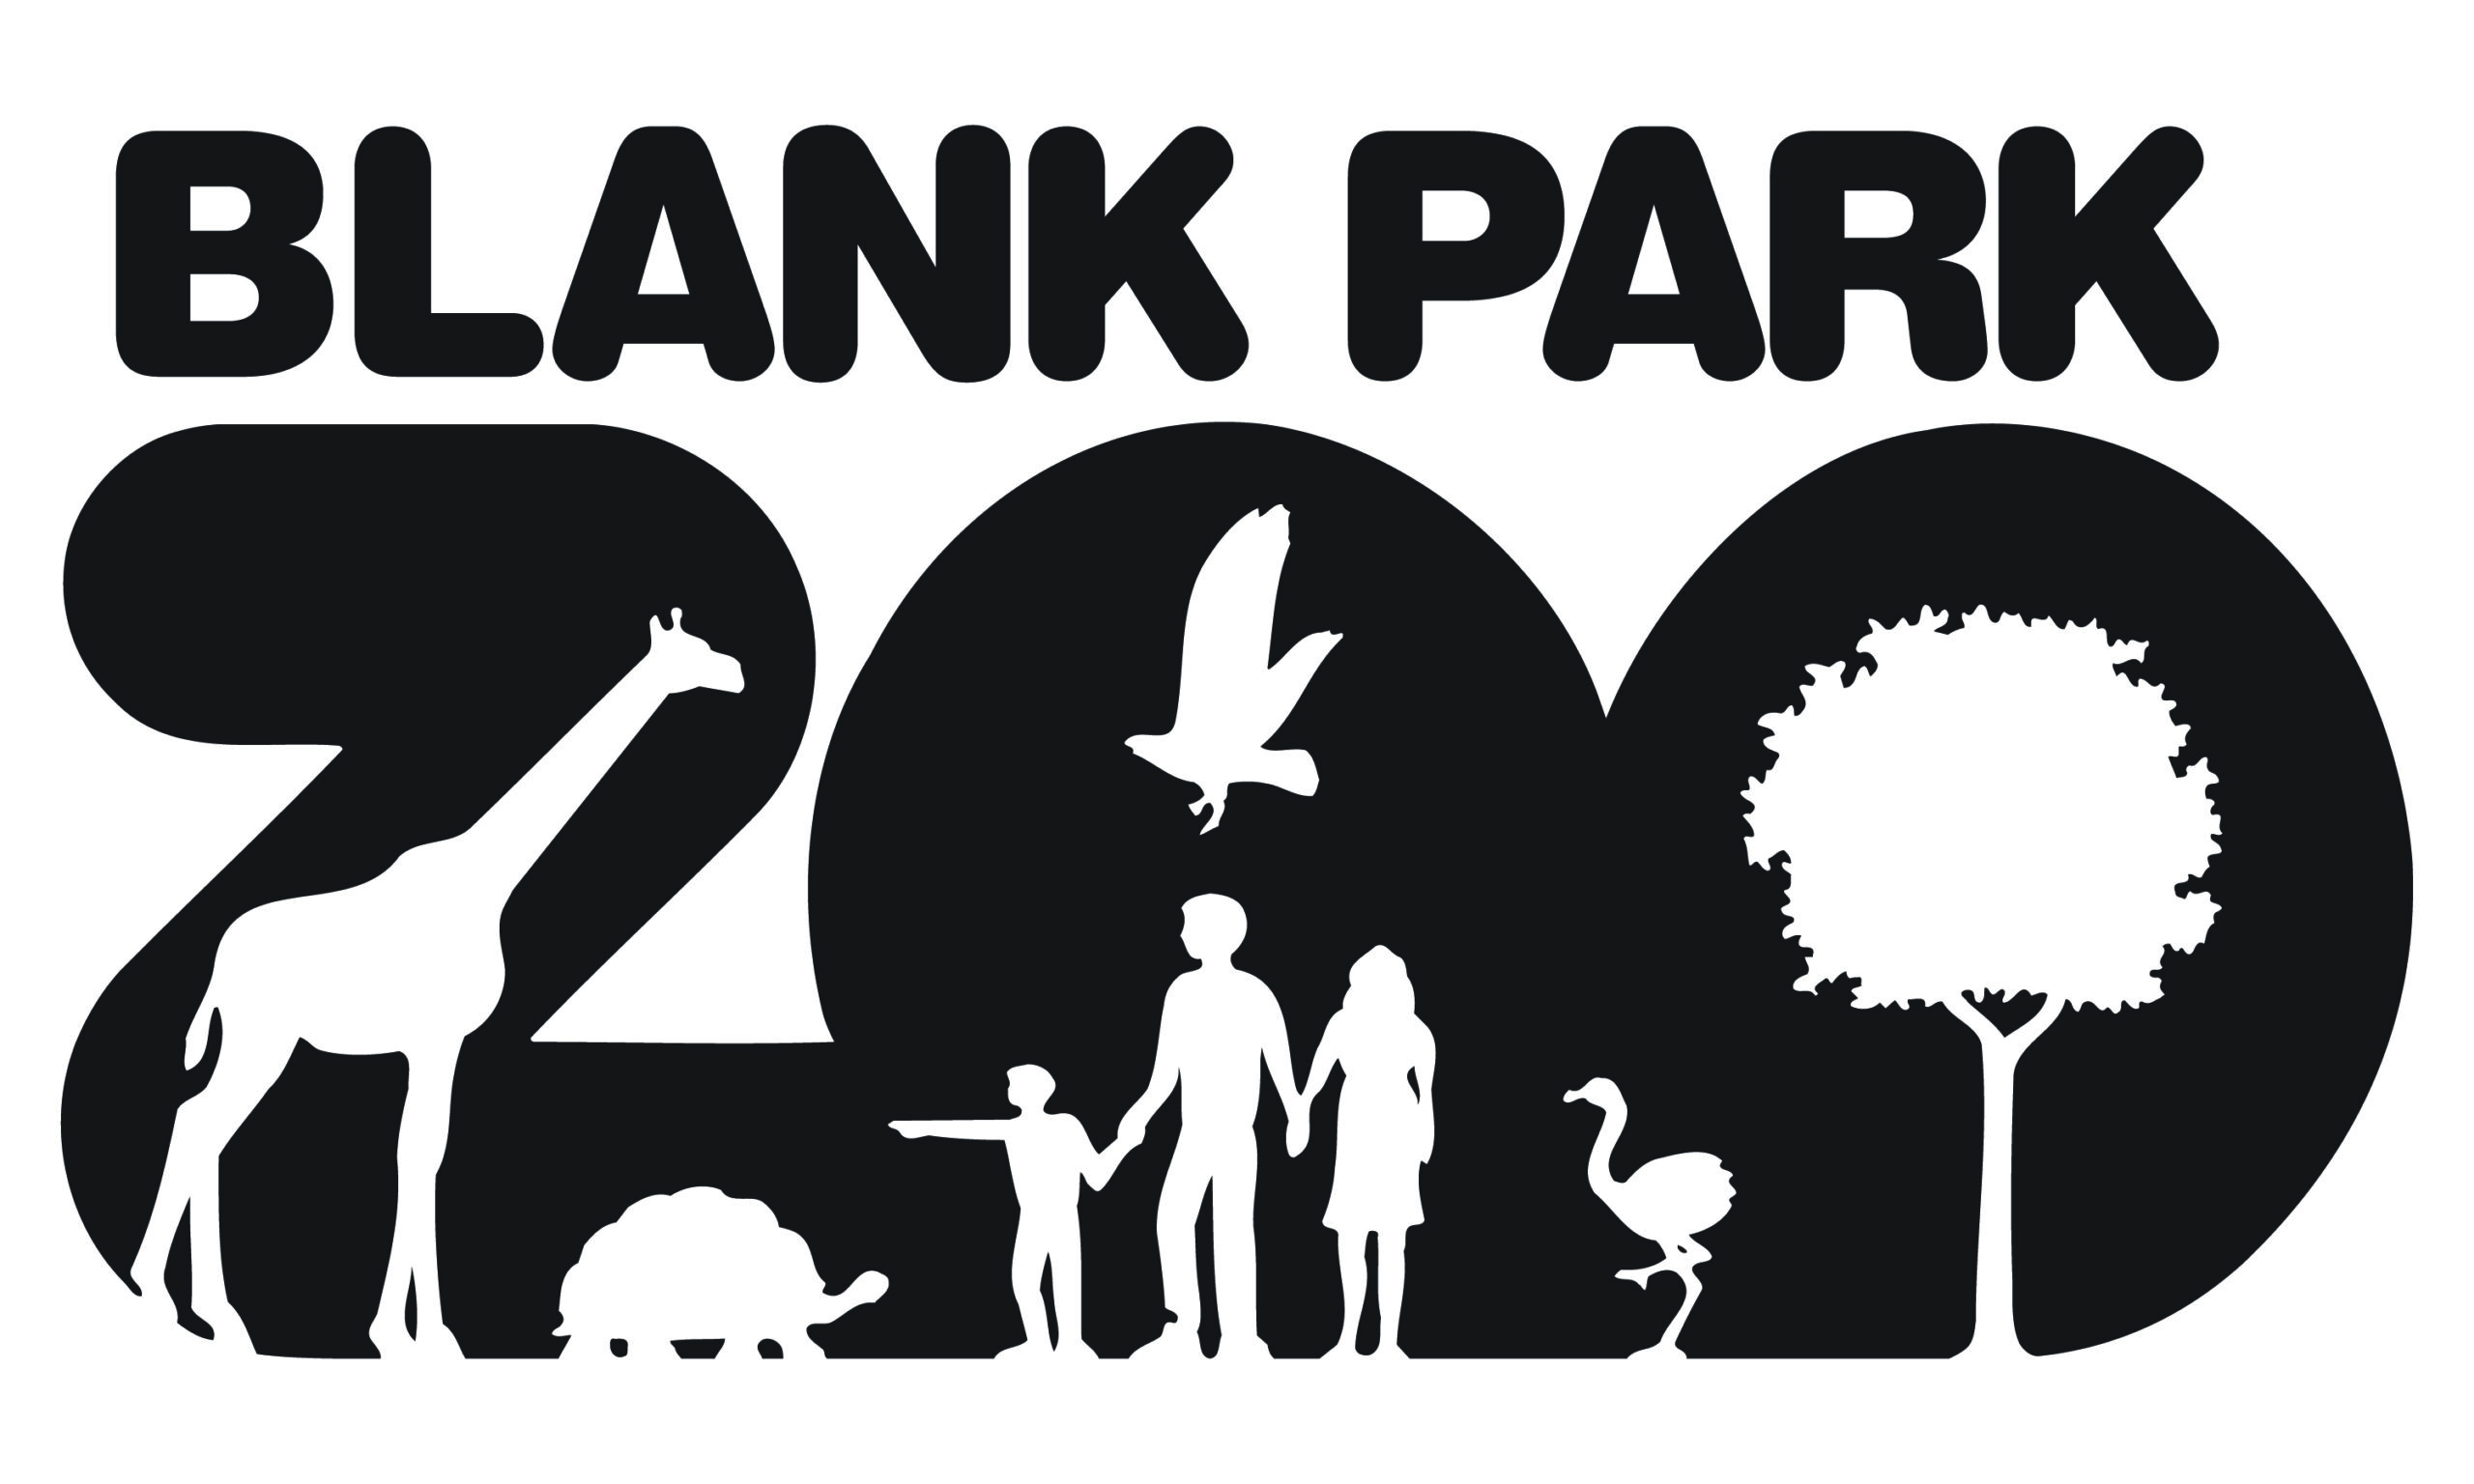 logo for zoo: text reads "blank park zoo" cut out from the "zoo" is the shape of a giraffe, tortoise, a couple holding a small child's hand, a large bird flying, and a small tree. 